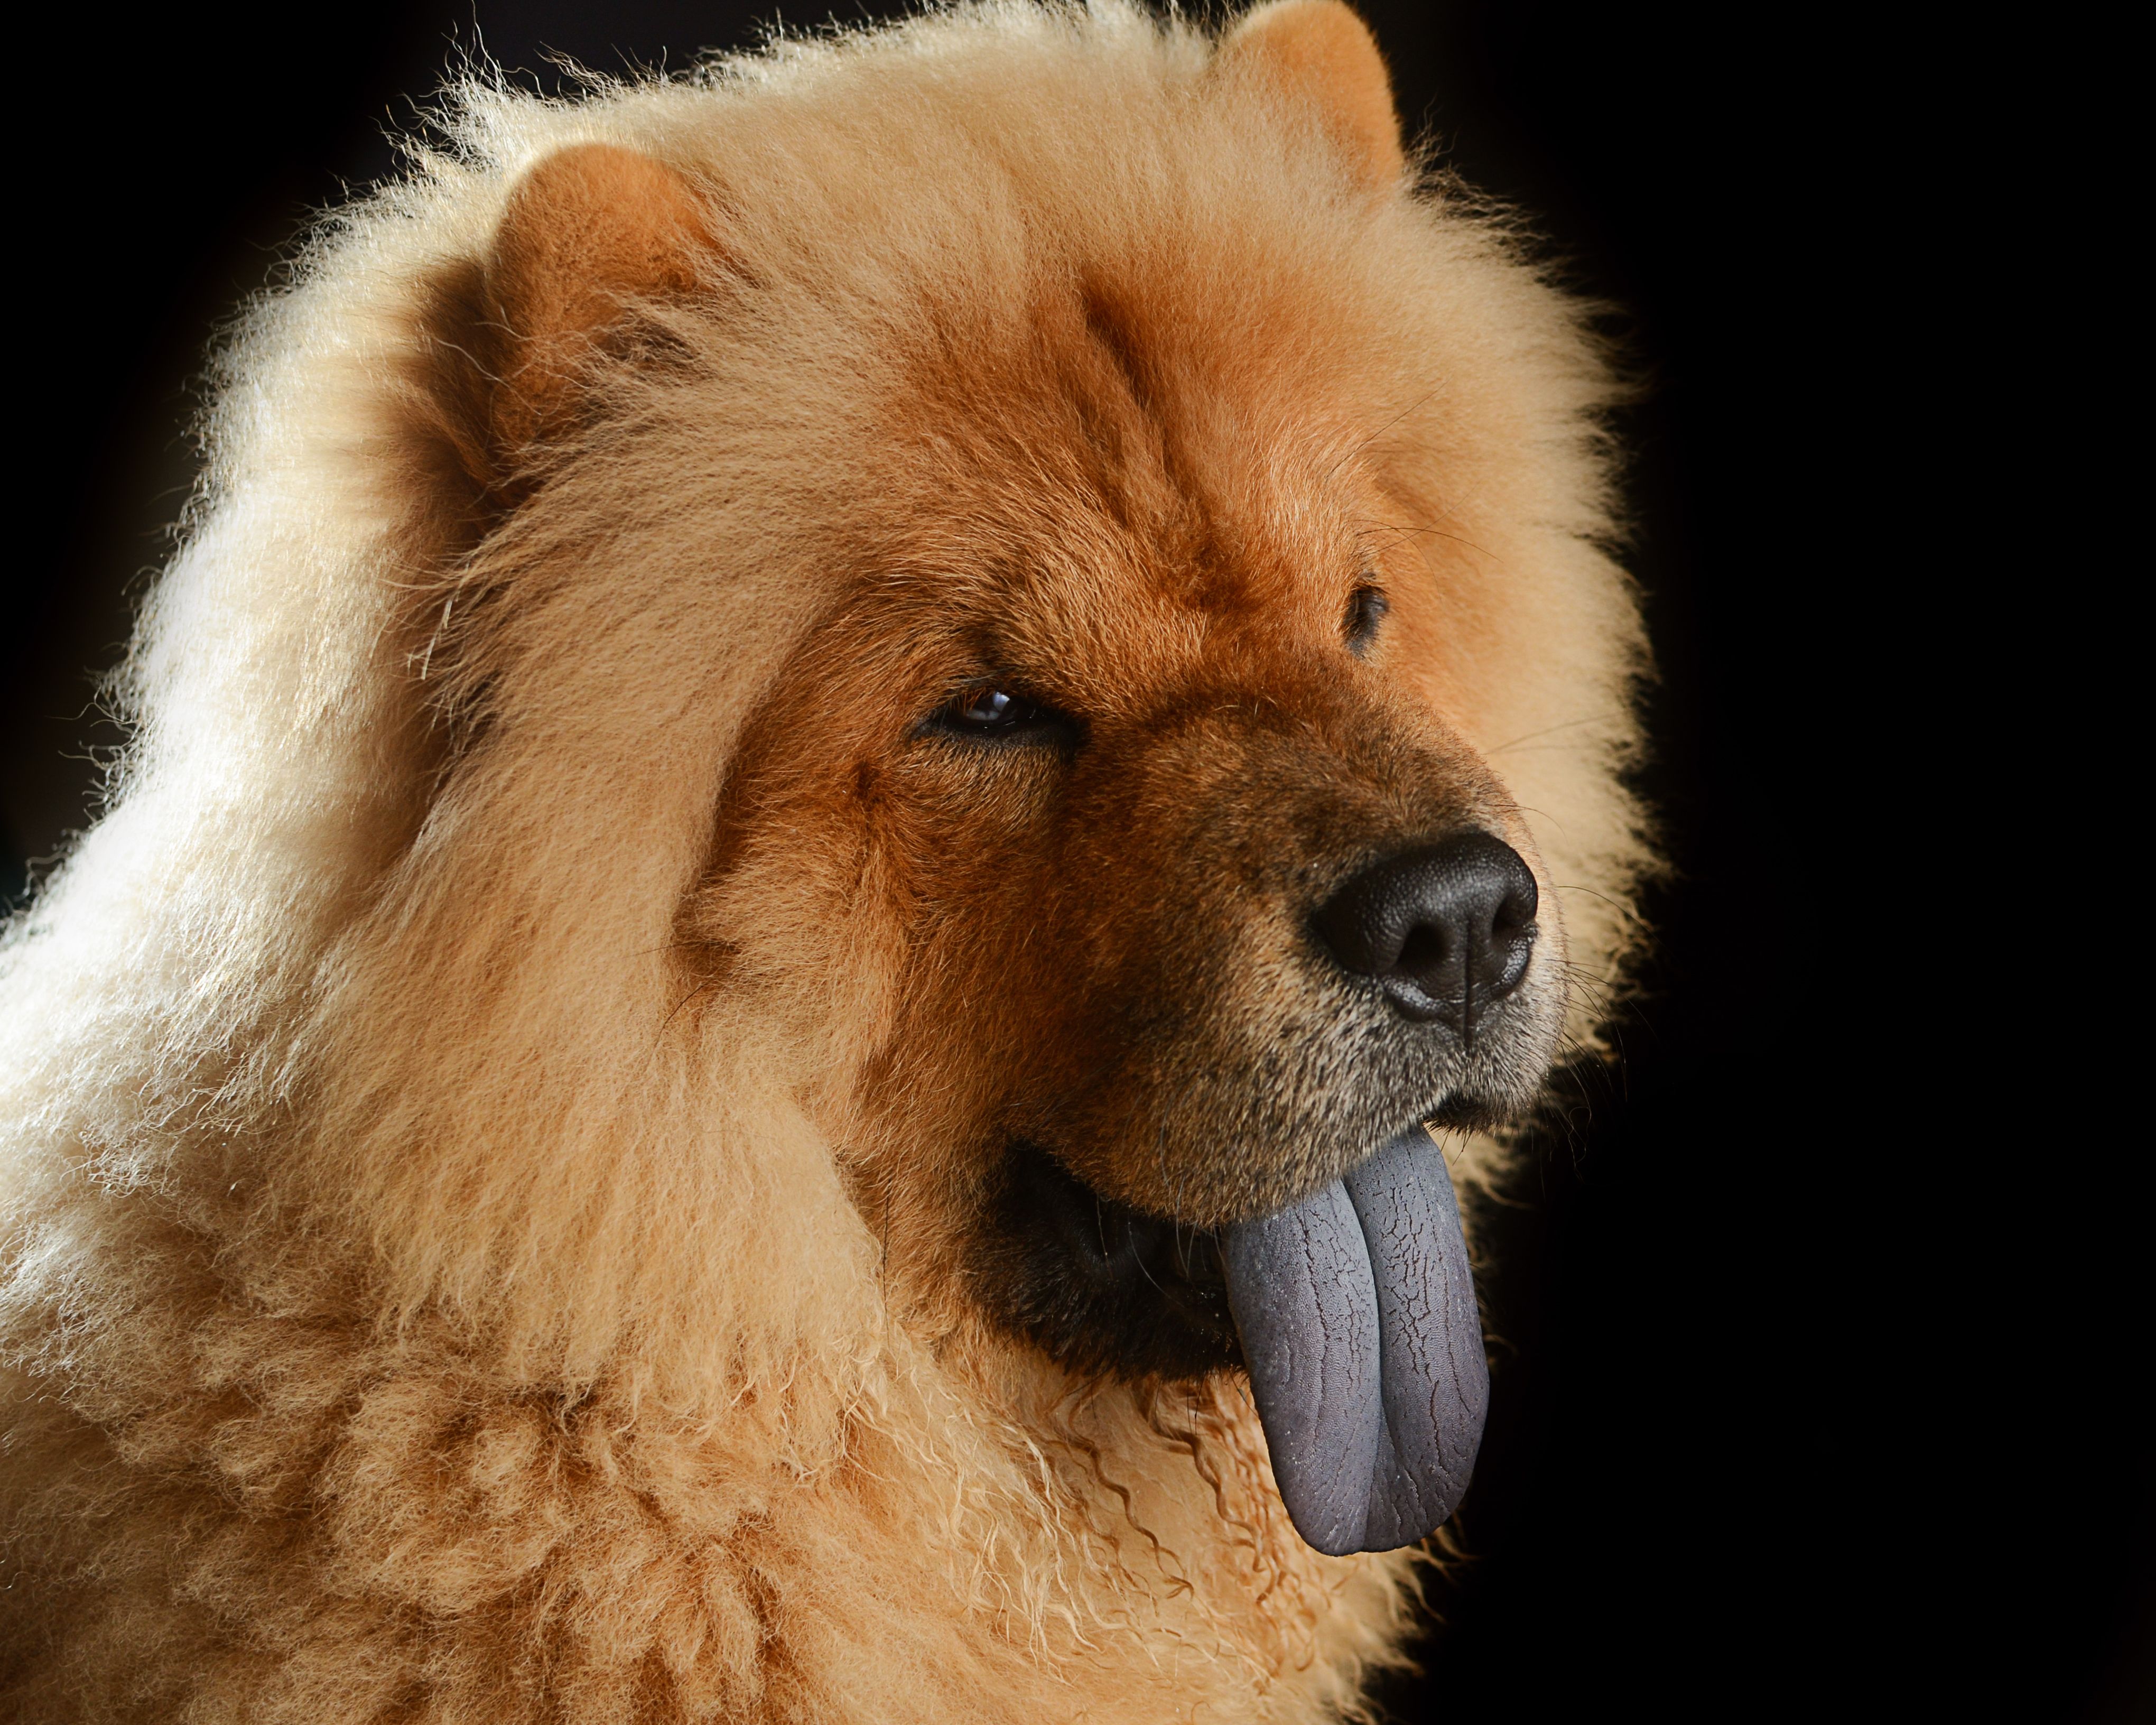 image Chow Chow Dogs Ginger color Snout Head animal 4080x3264